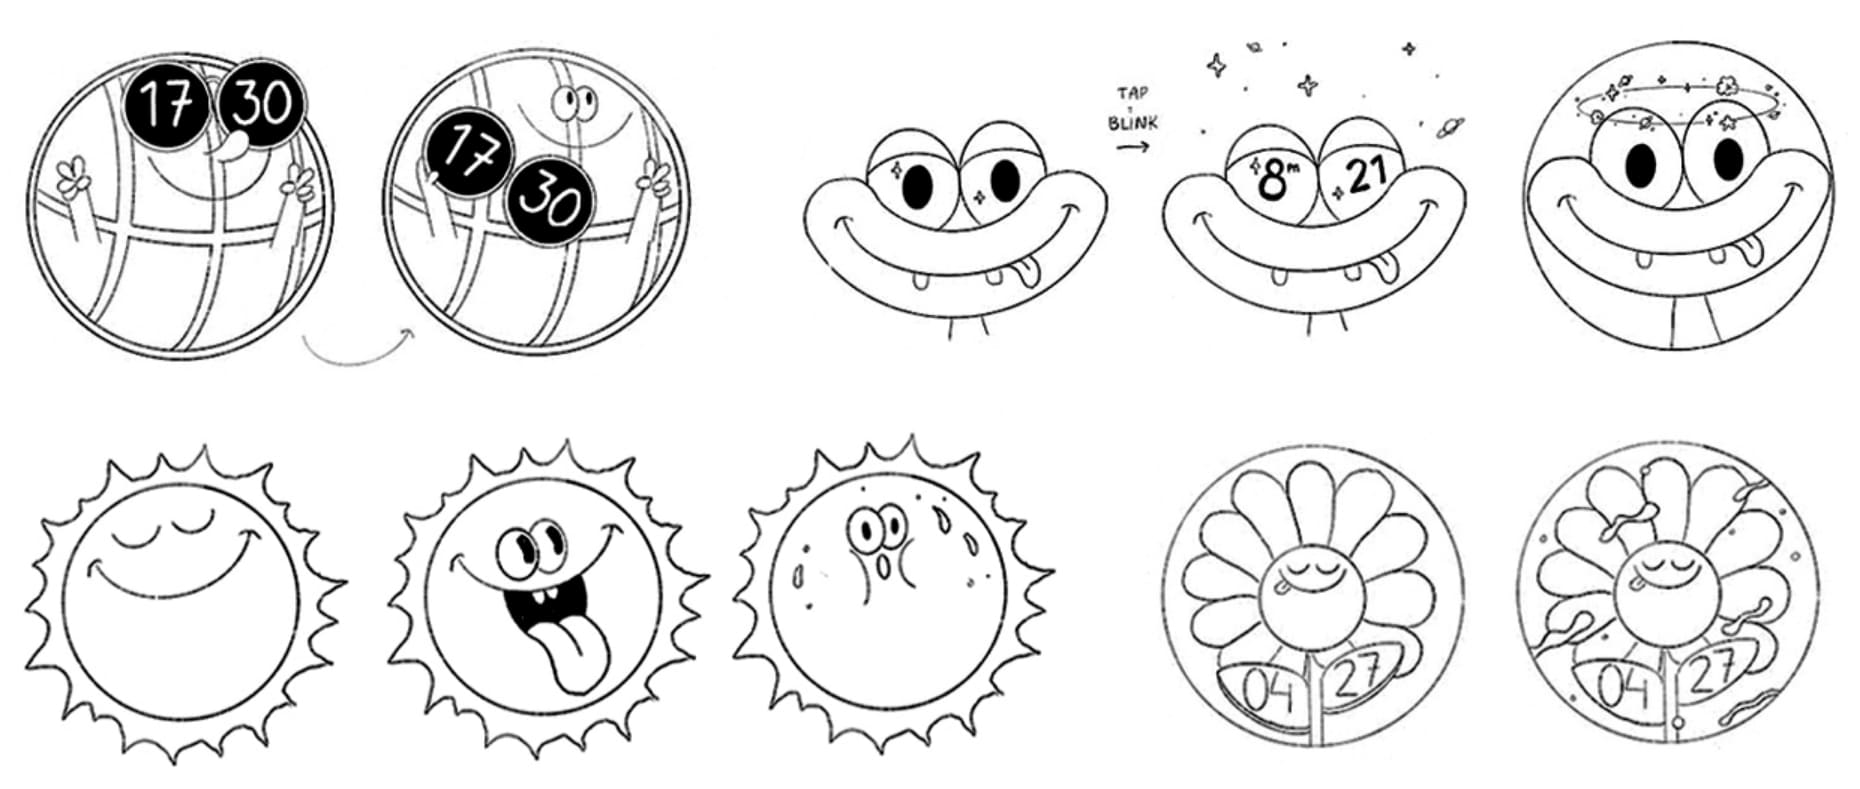 This is an image of 4 draft design sketches for the 「Funny Faces」 on the watch face.